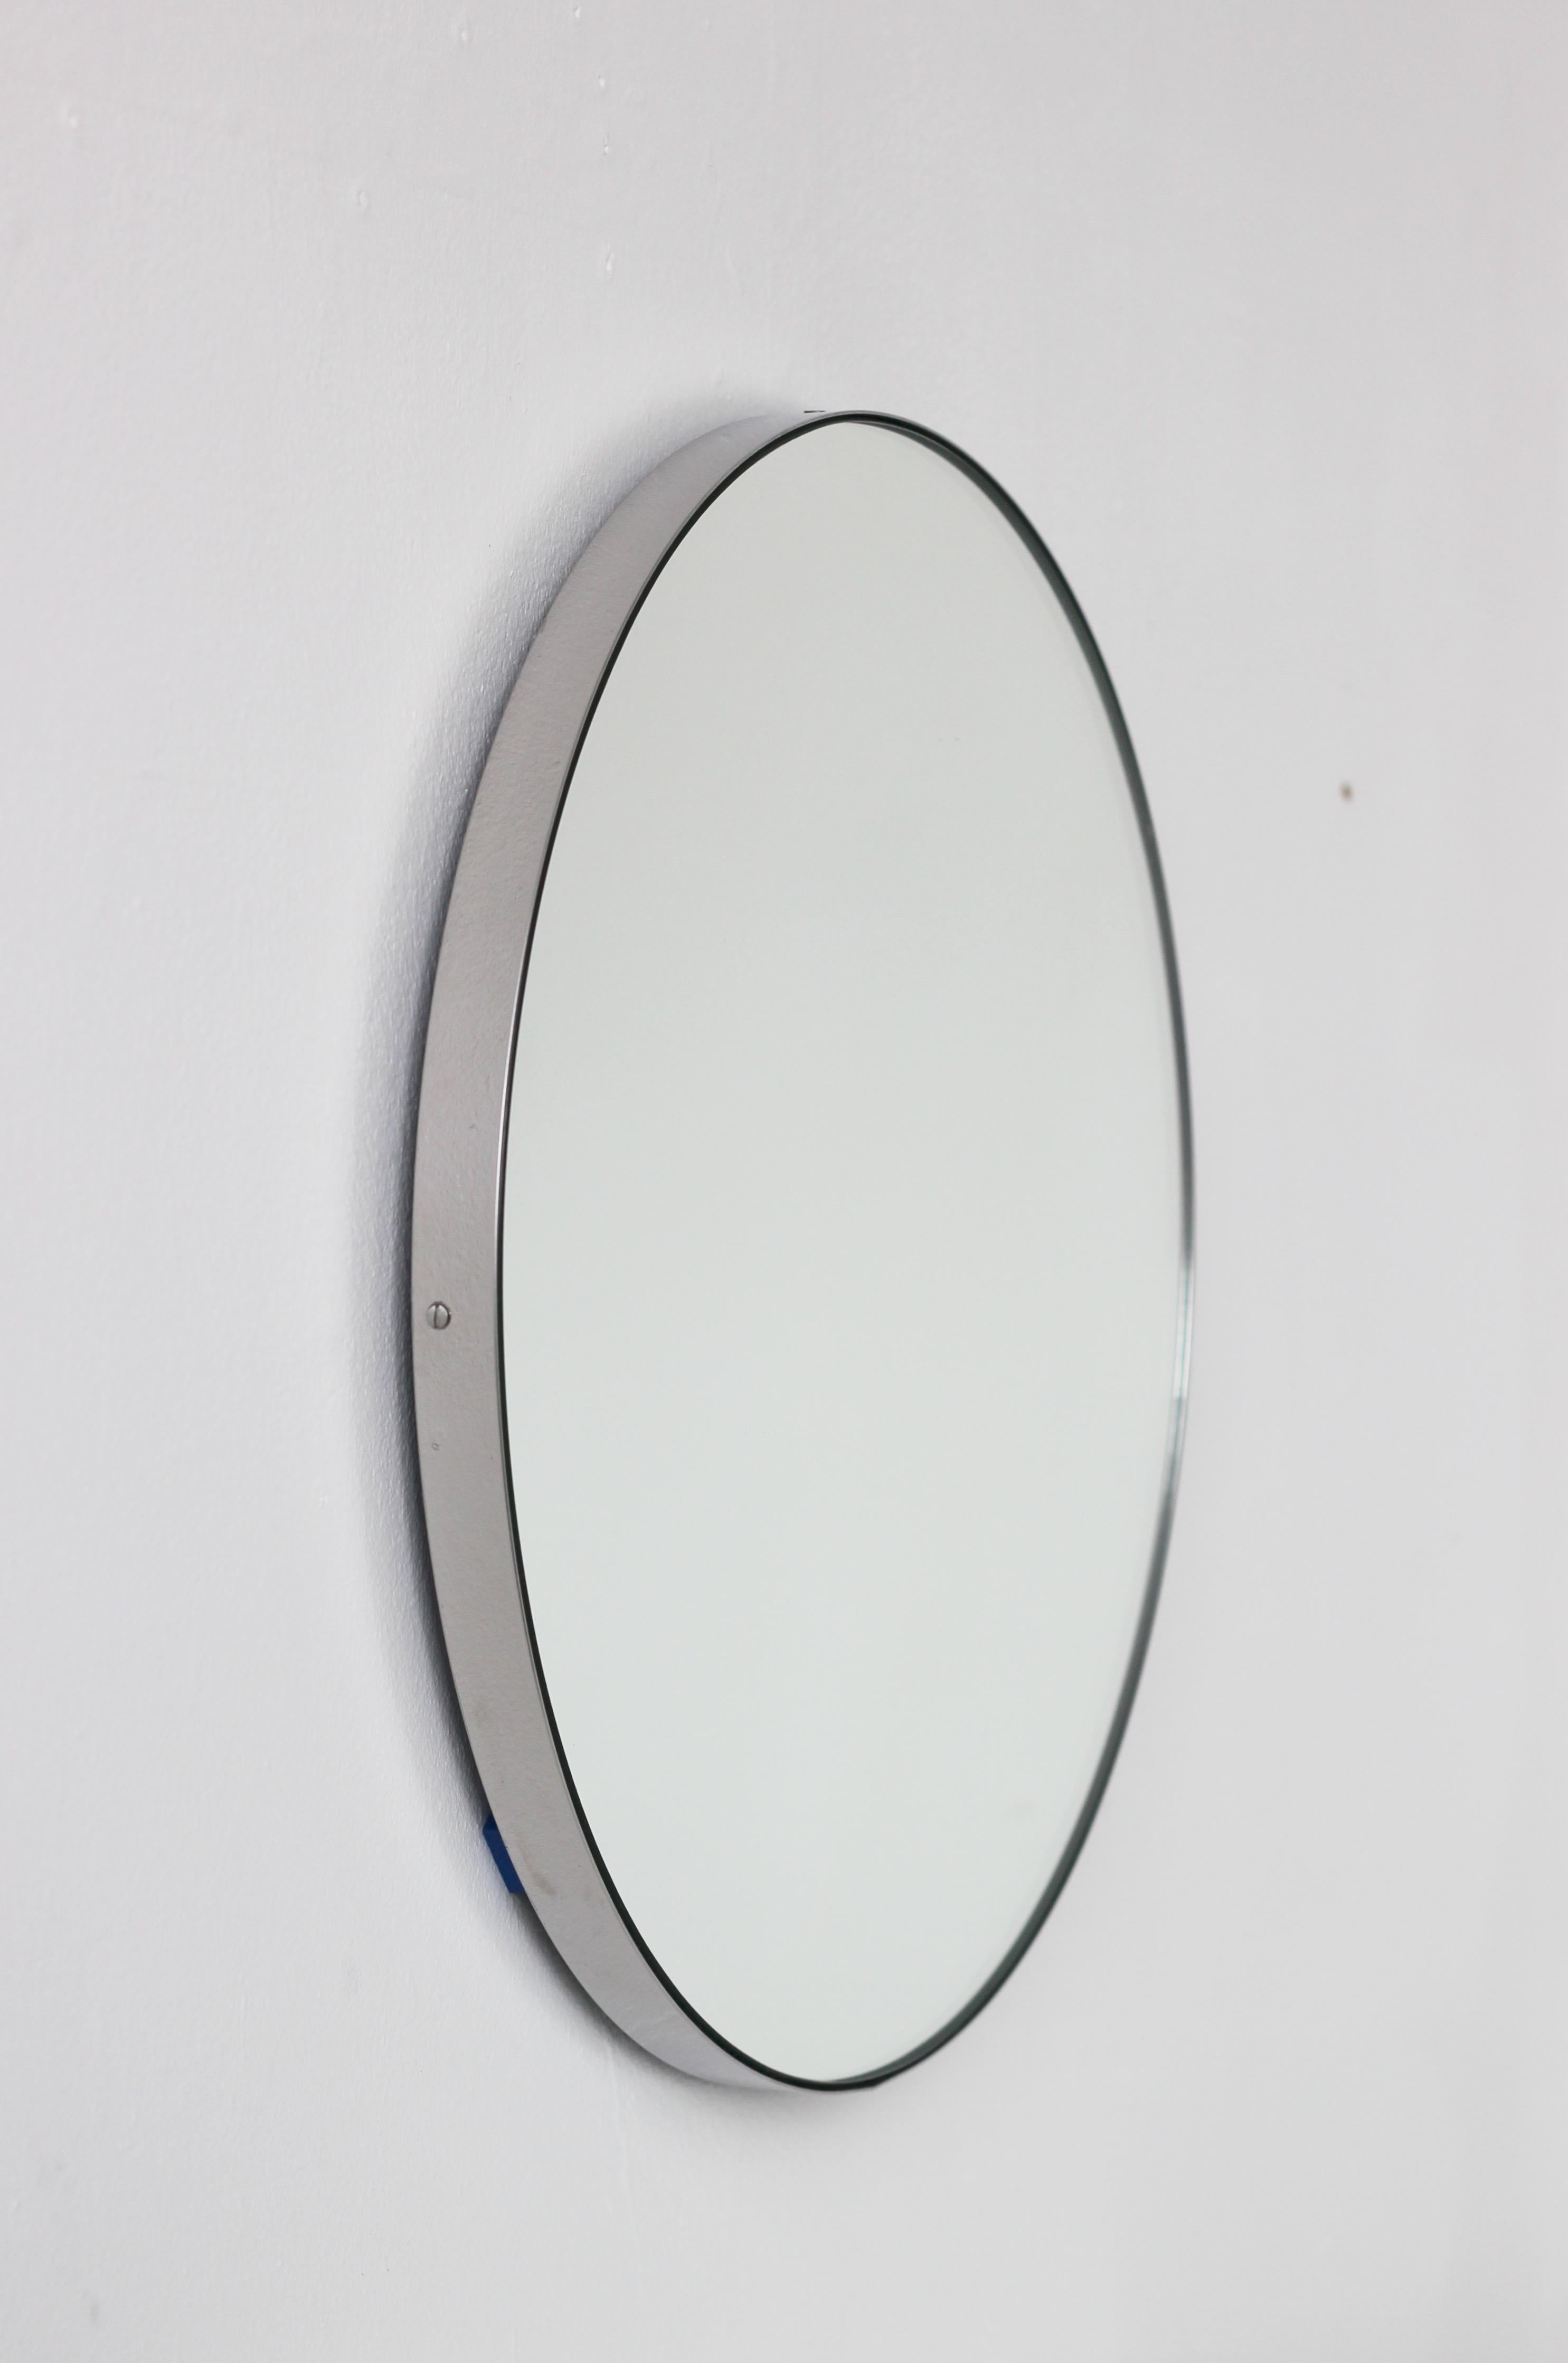 Minimalist Orbis™ round mirror with an elegant brushed stainless steel frame (also available in a polished finish). The detailing and finish, including visible screws, emphasise the crafty and quality feel of the mirror, a true signature of our